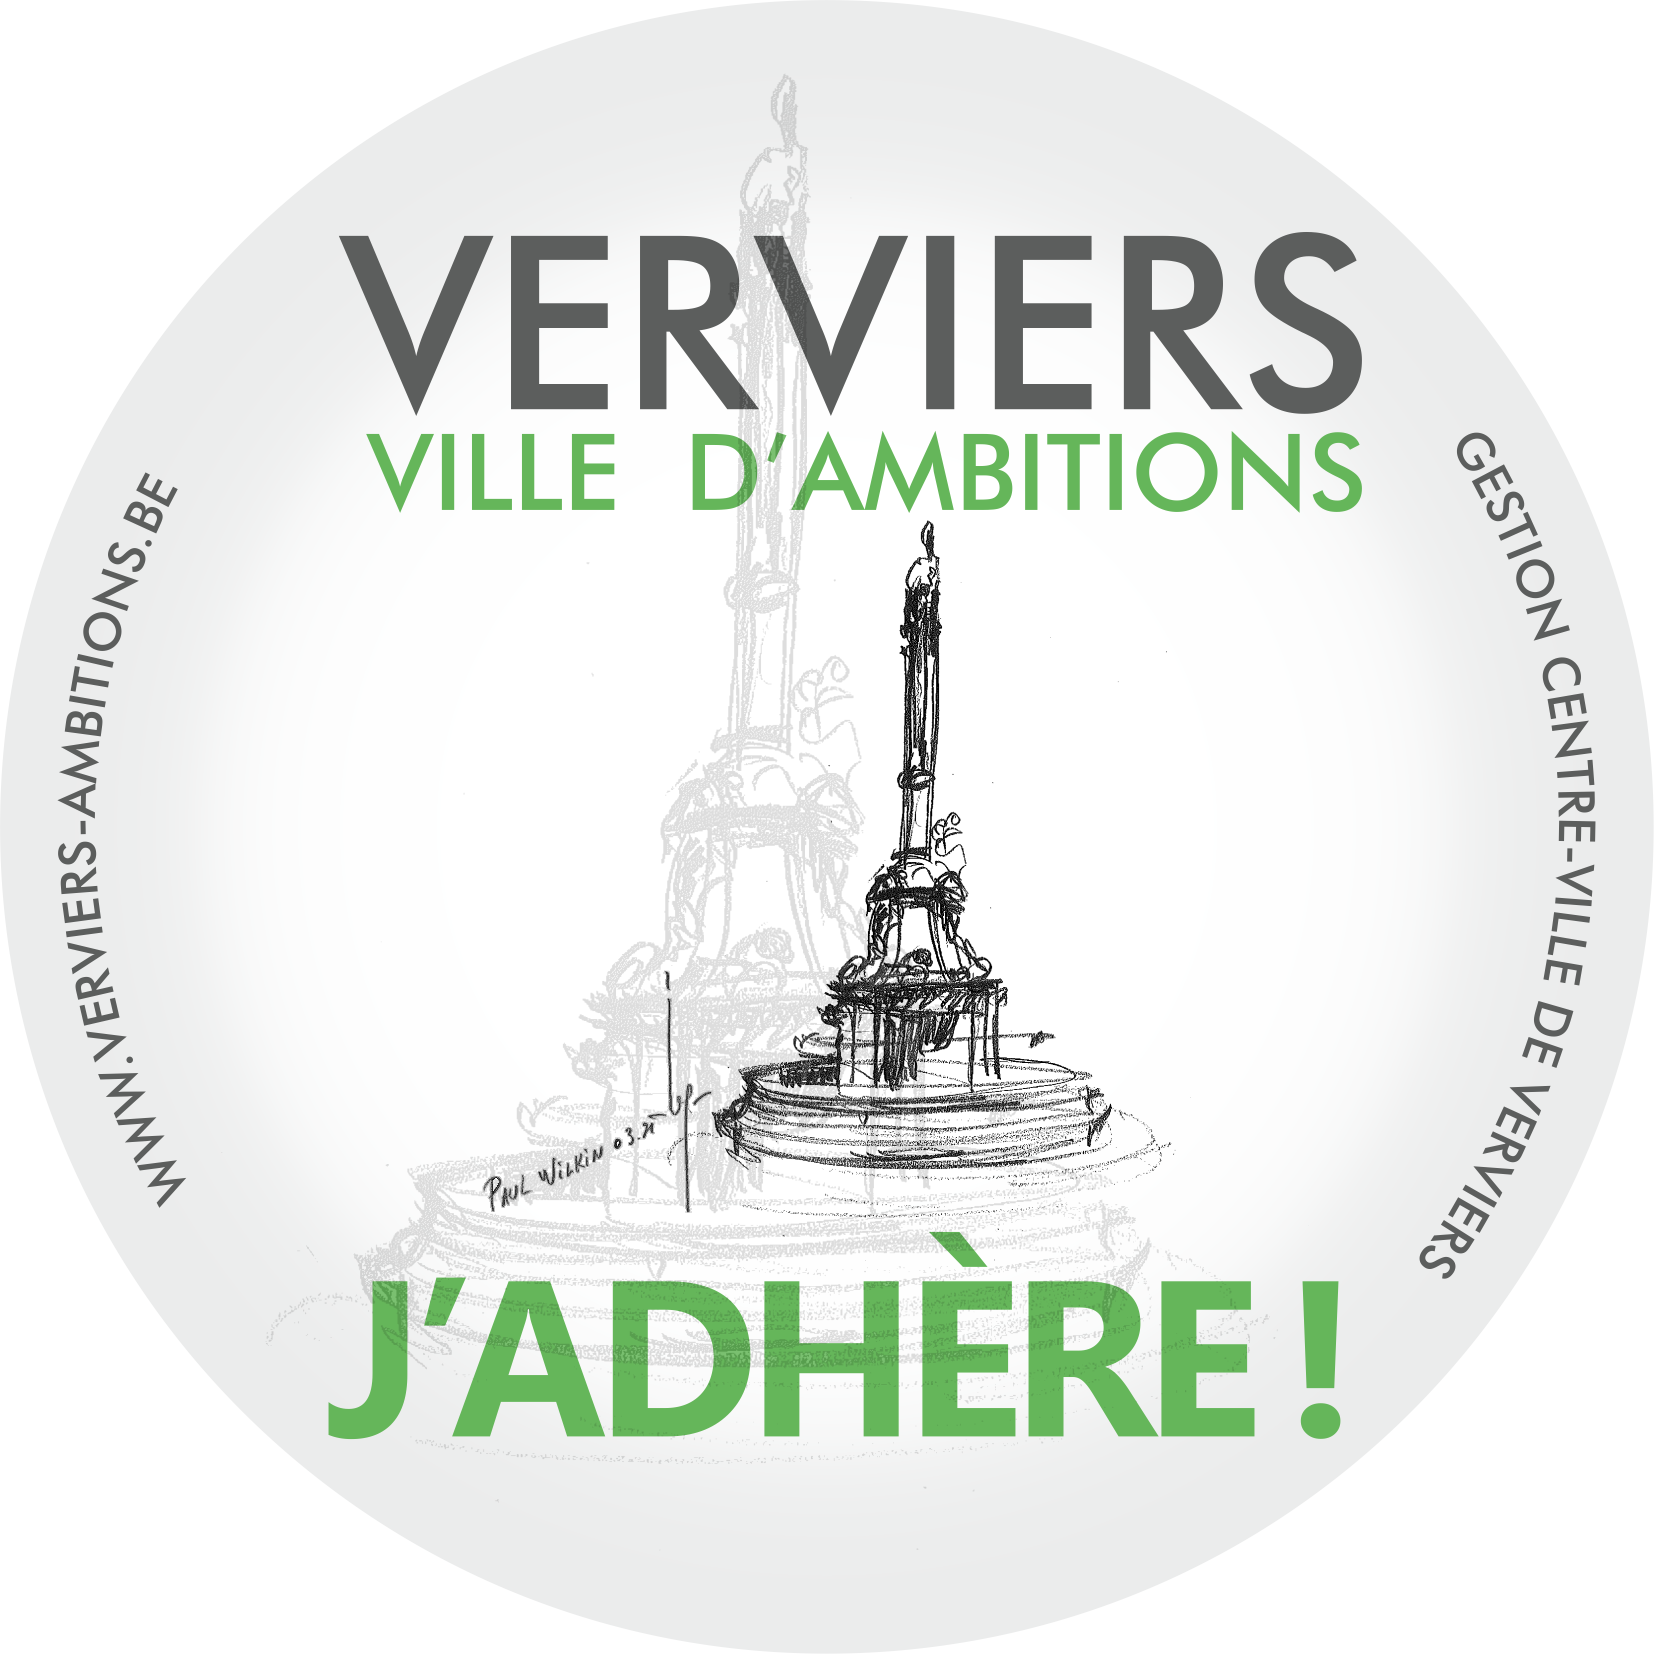 Verviers Ambitions